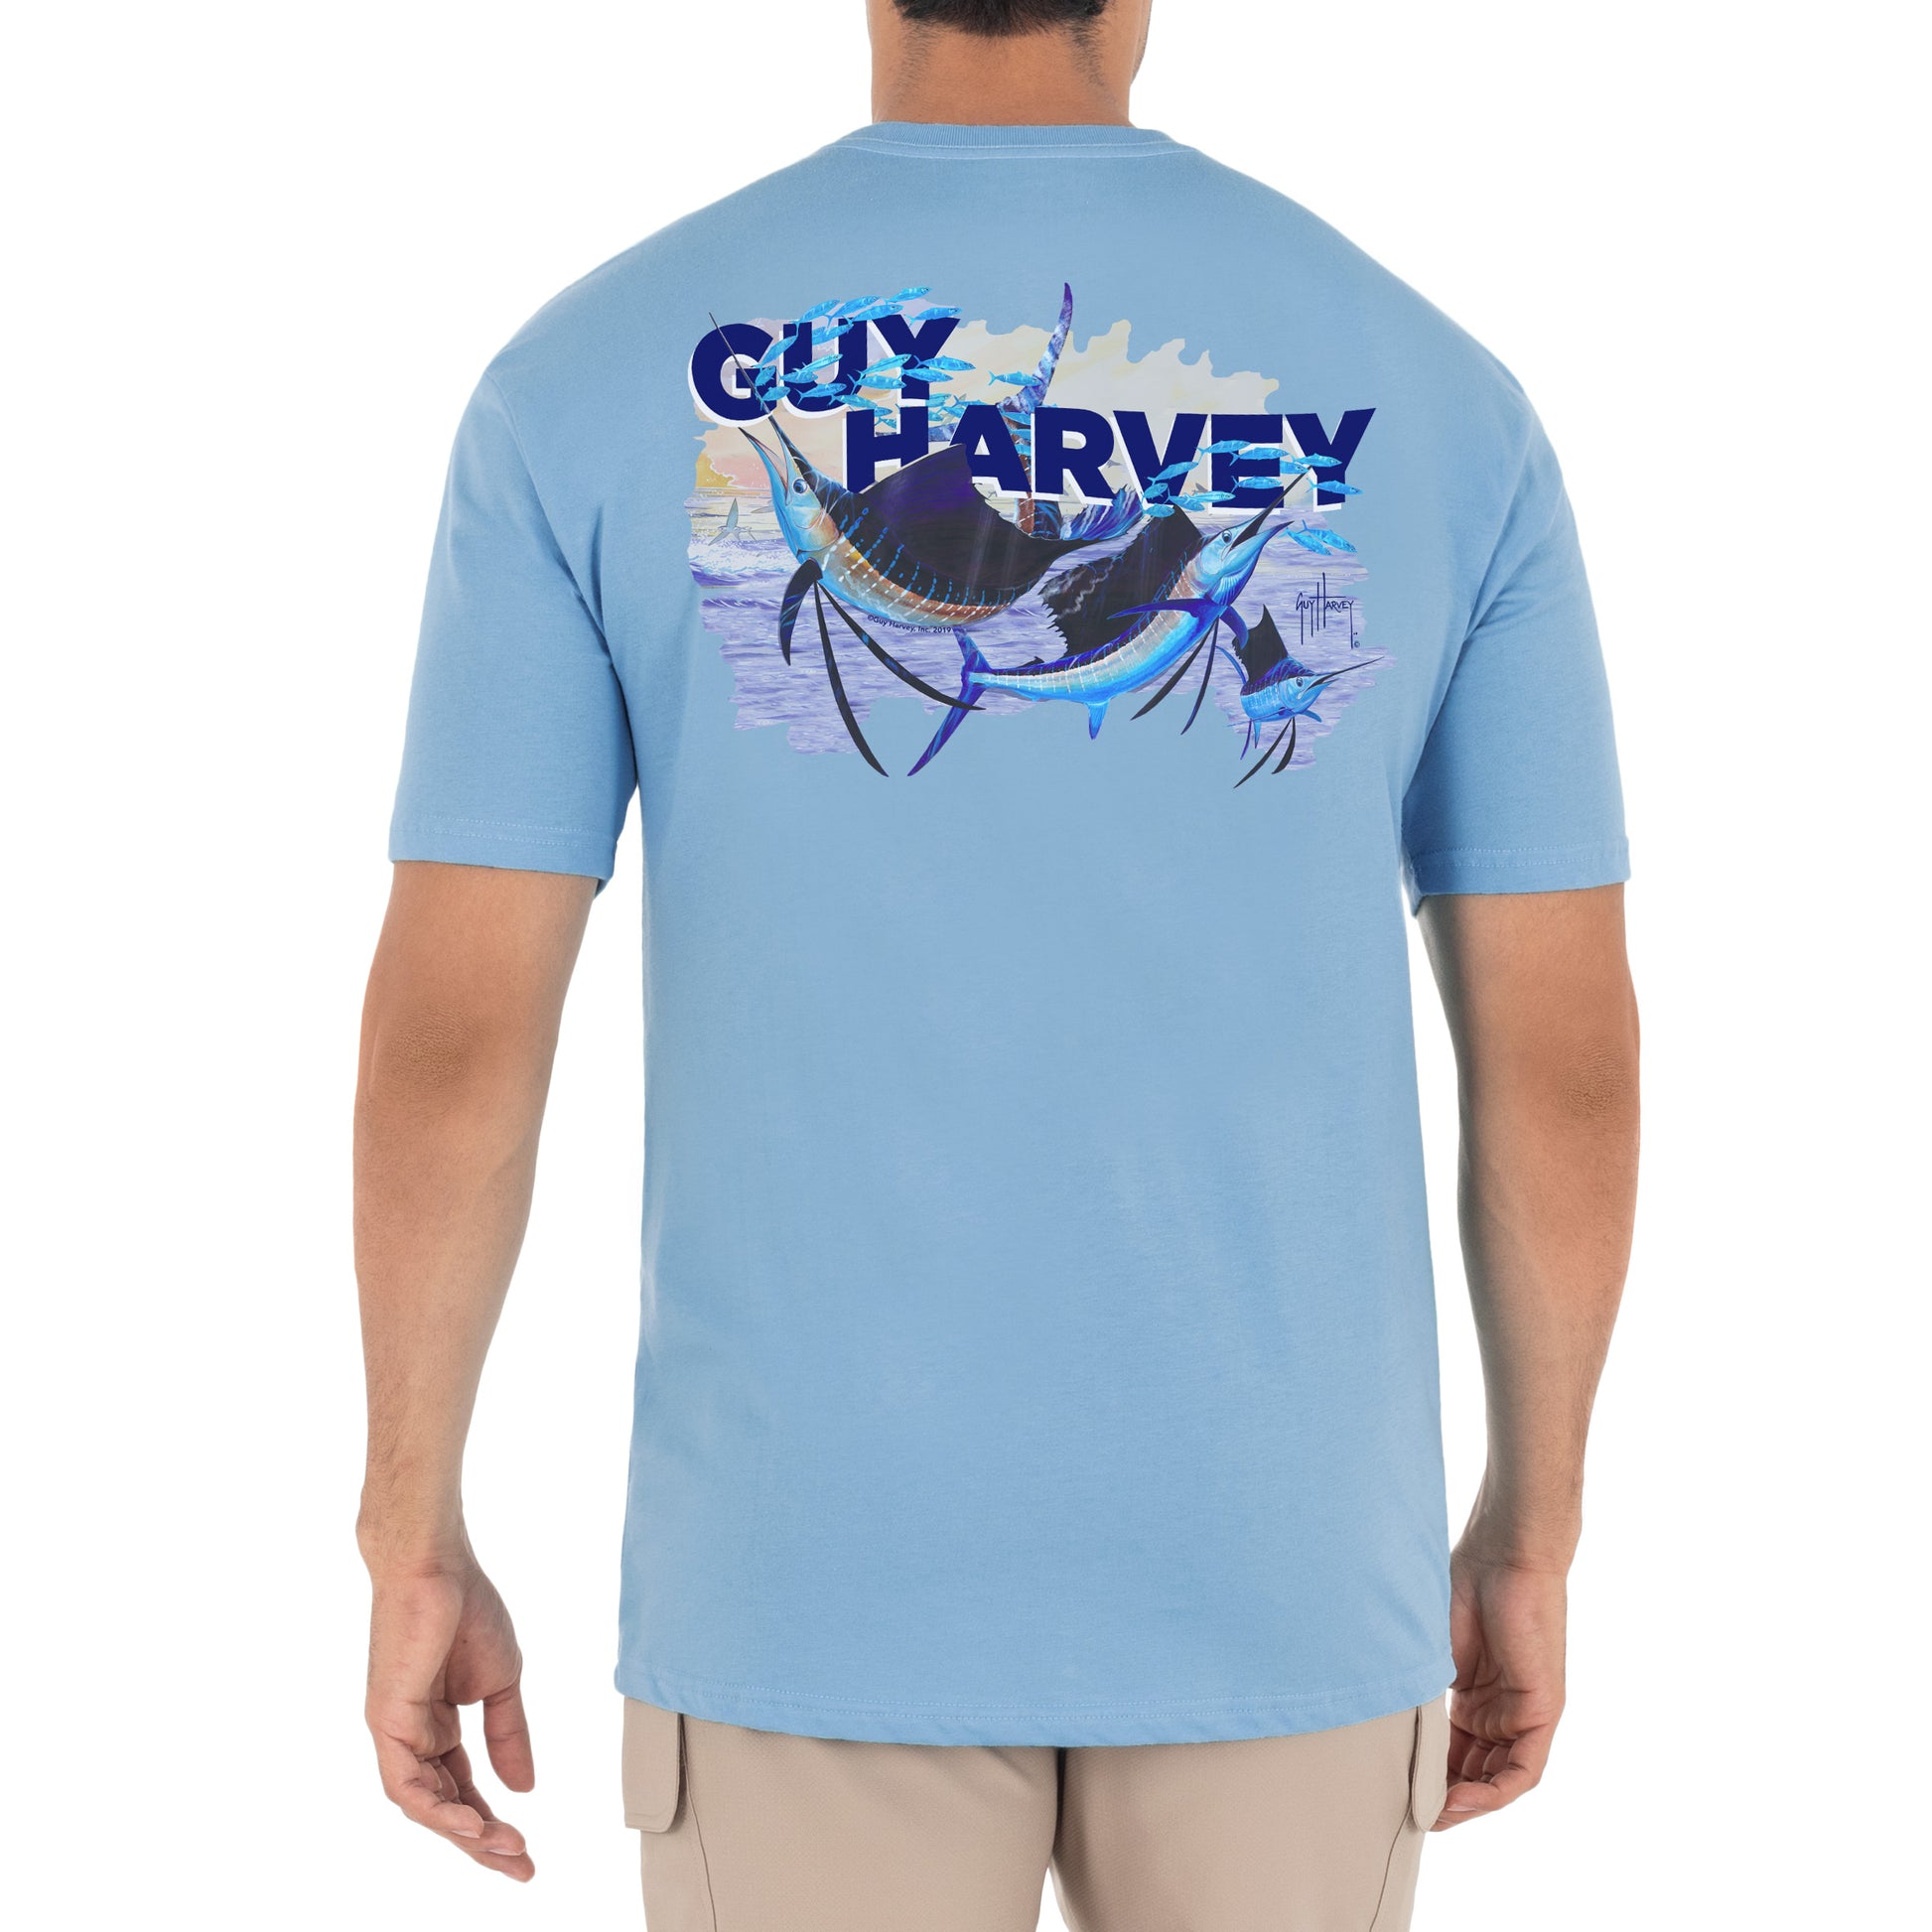 39 Fishing Jerseys ideas  jersey, personalized clothes, fishing tournaments